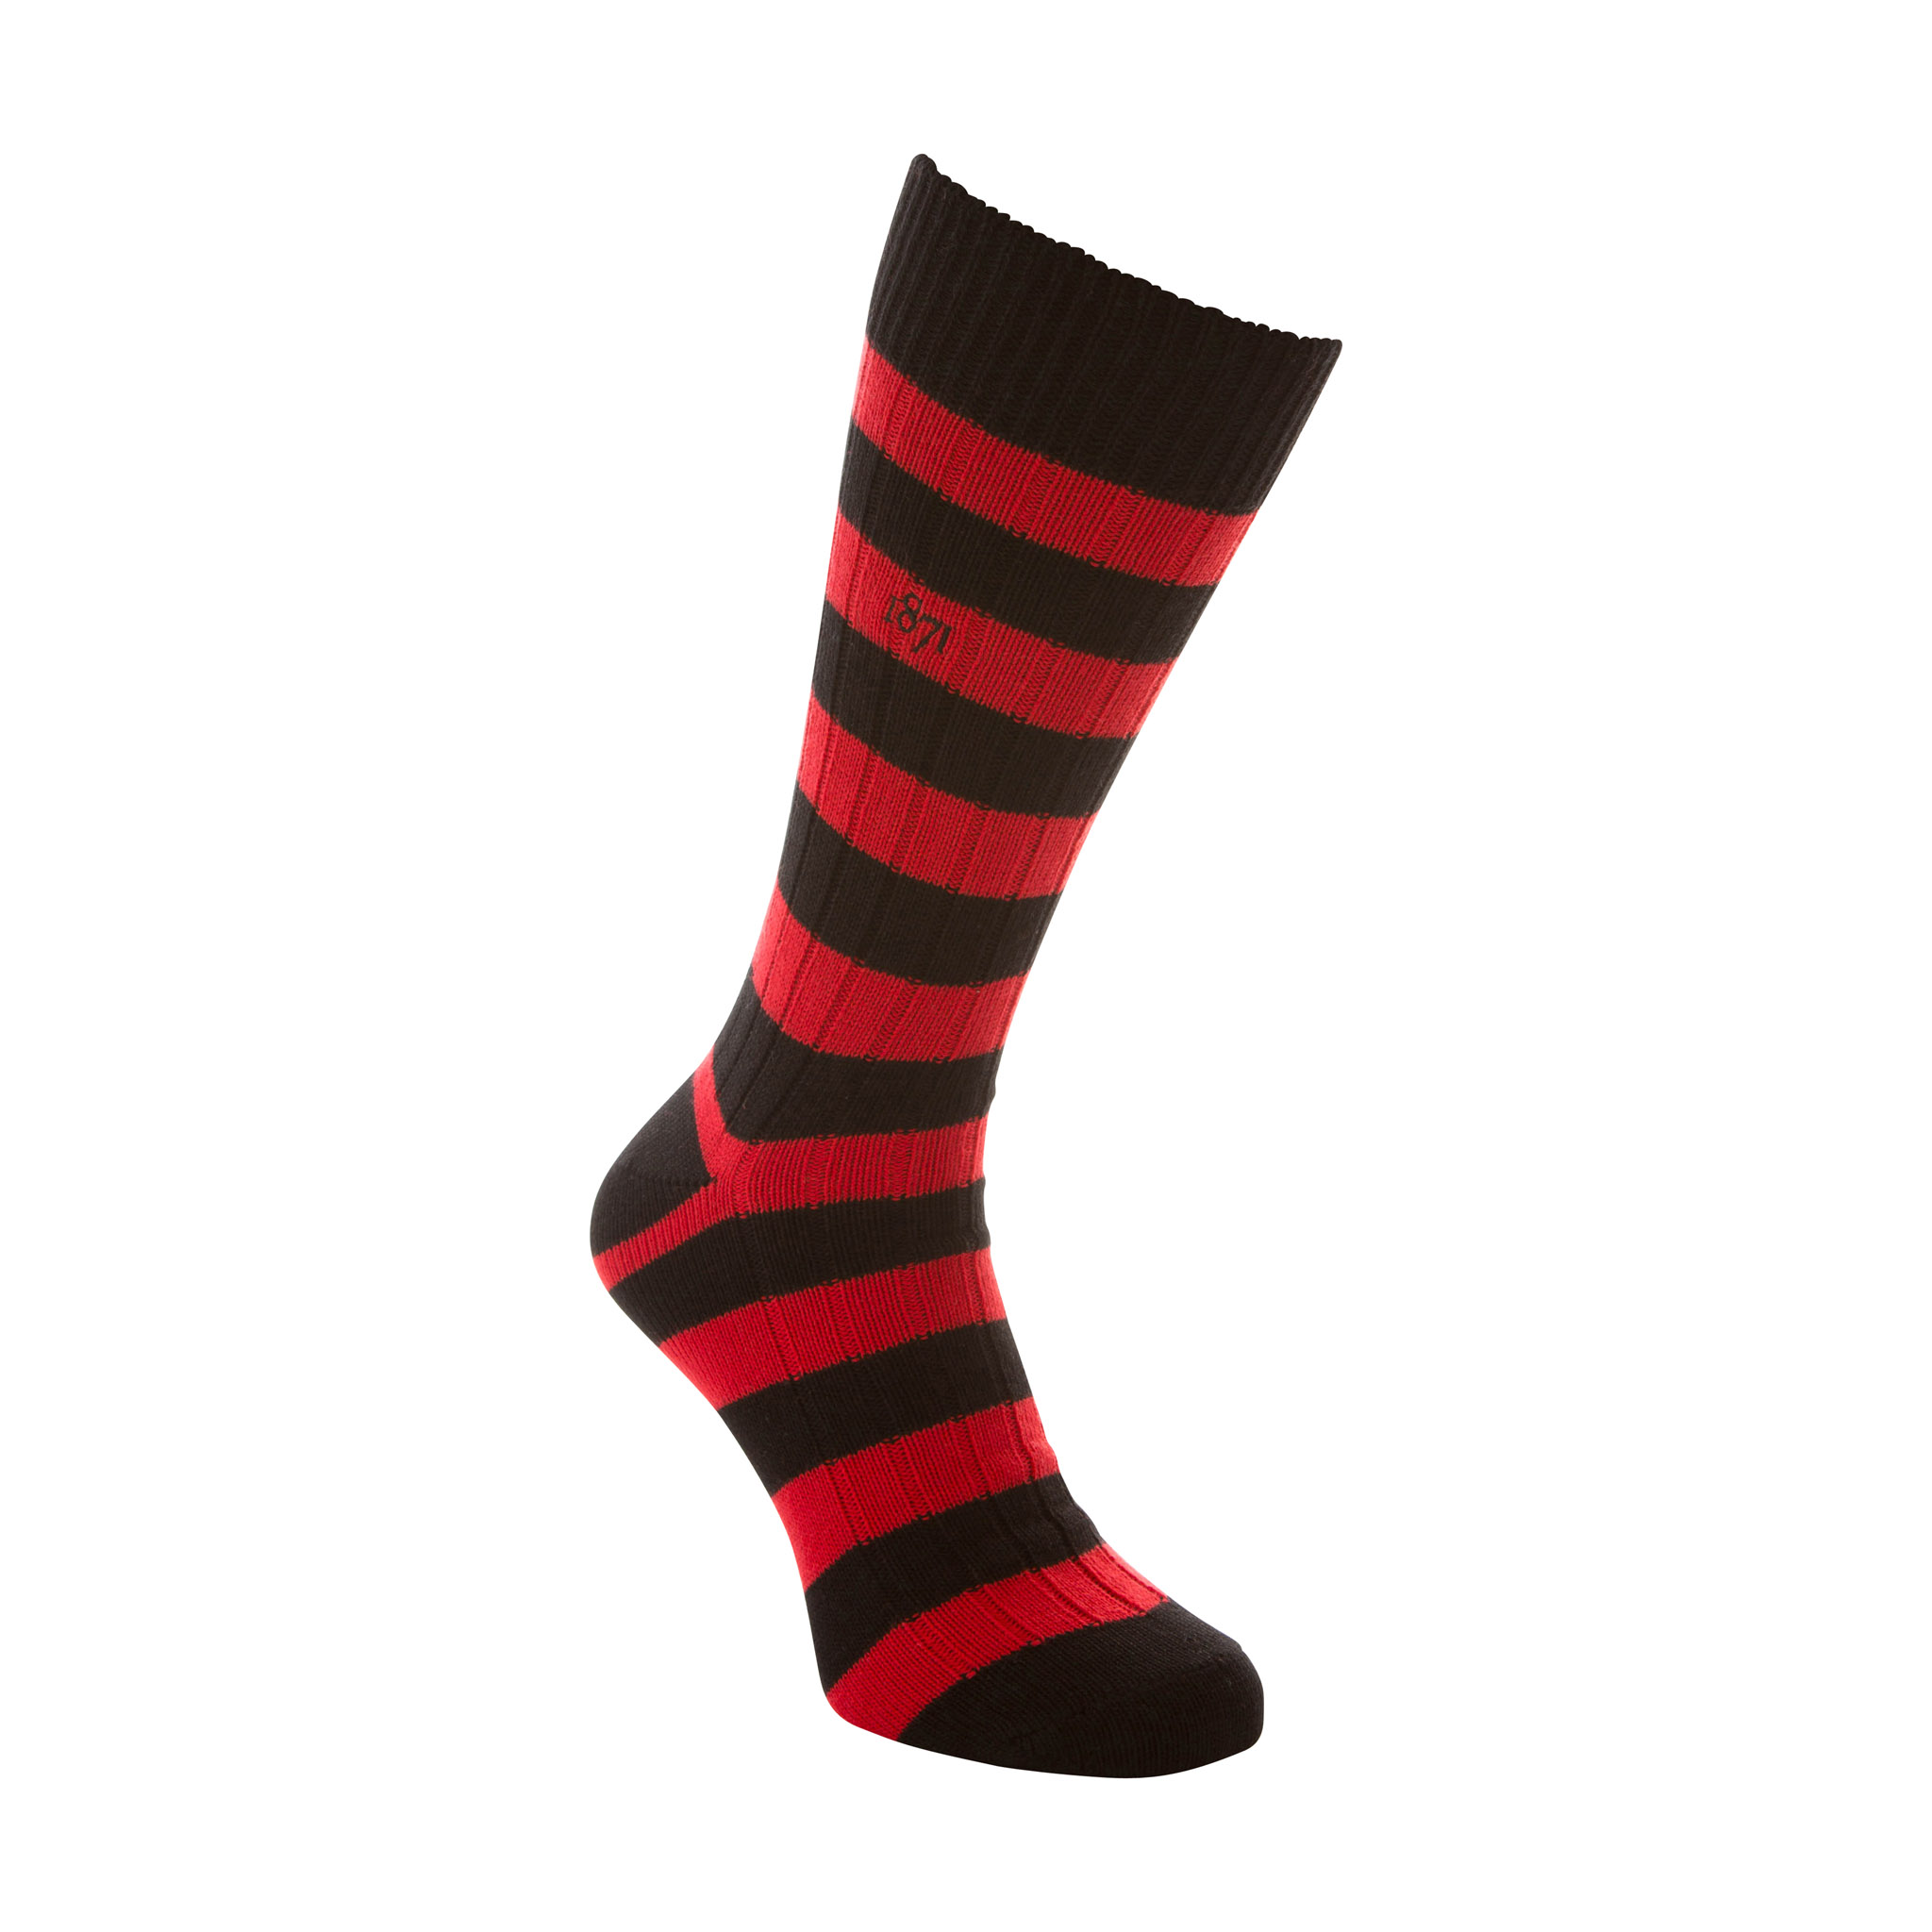 Cotton black and red stripe sock - side view